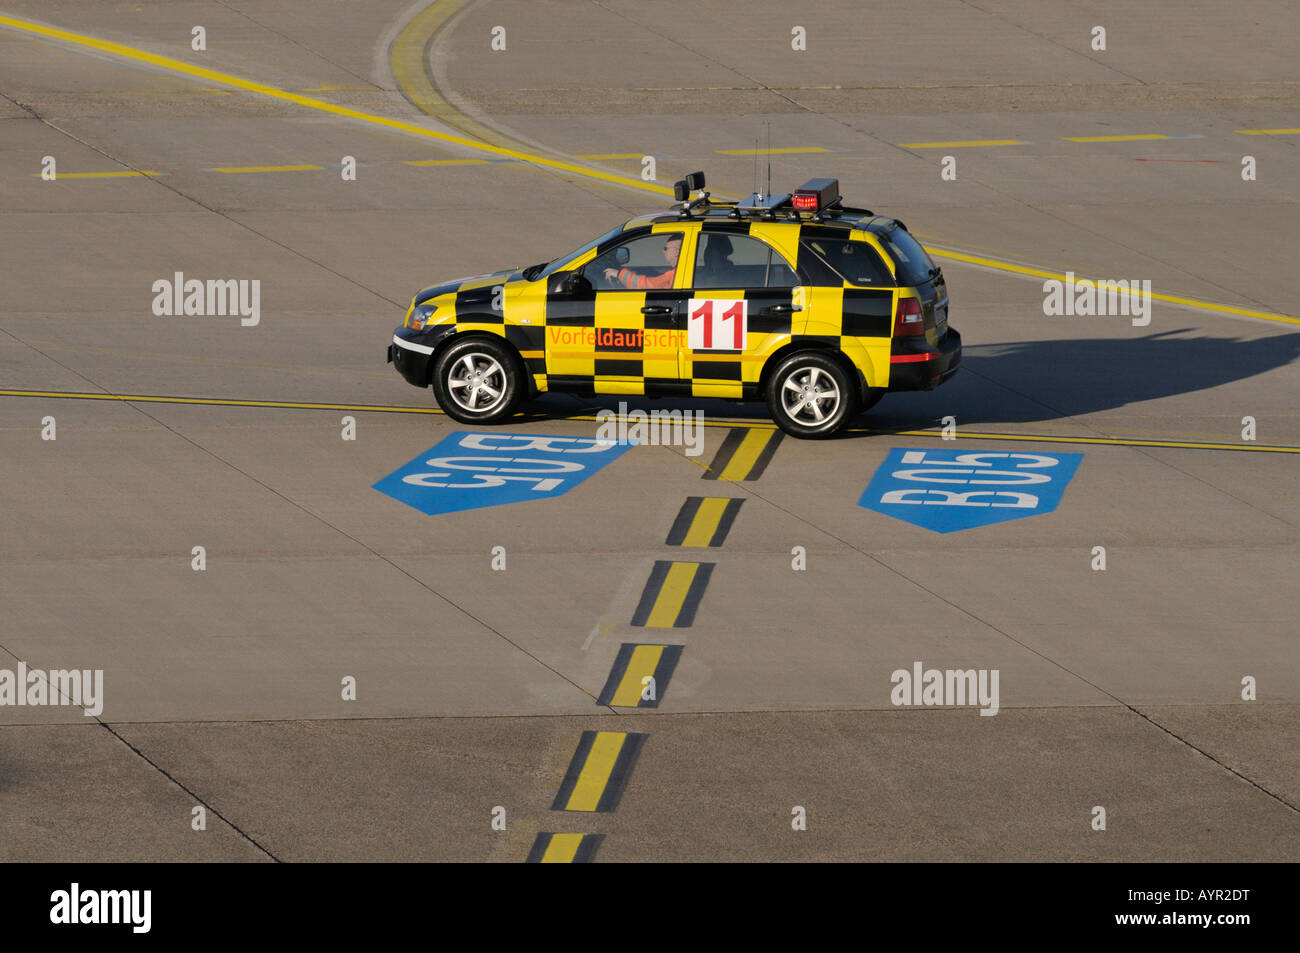 Airport taxiway control vehicle on the taxiway Stock Photo